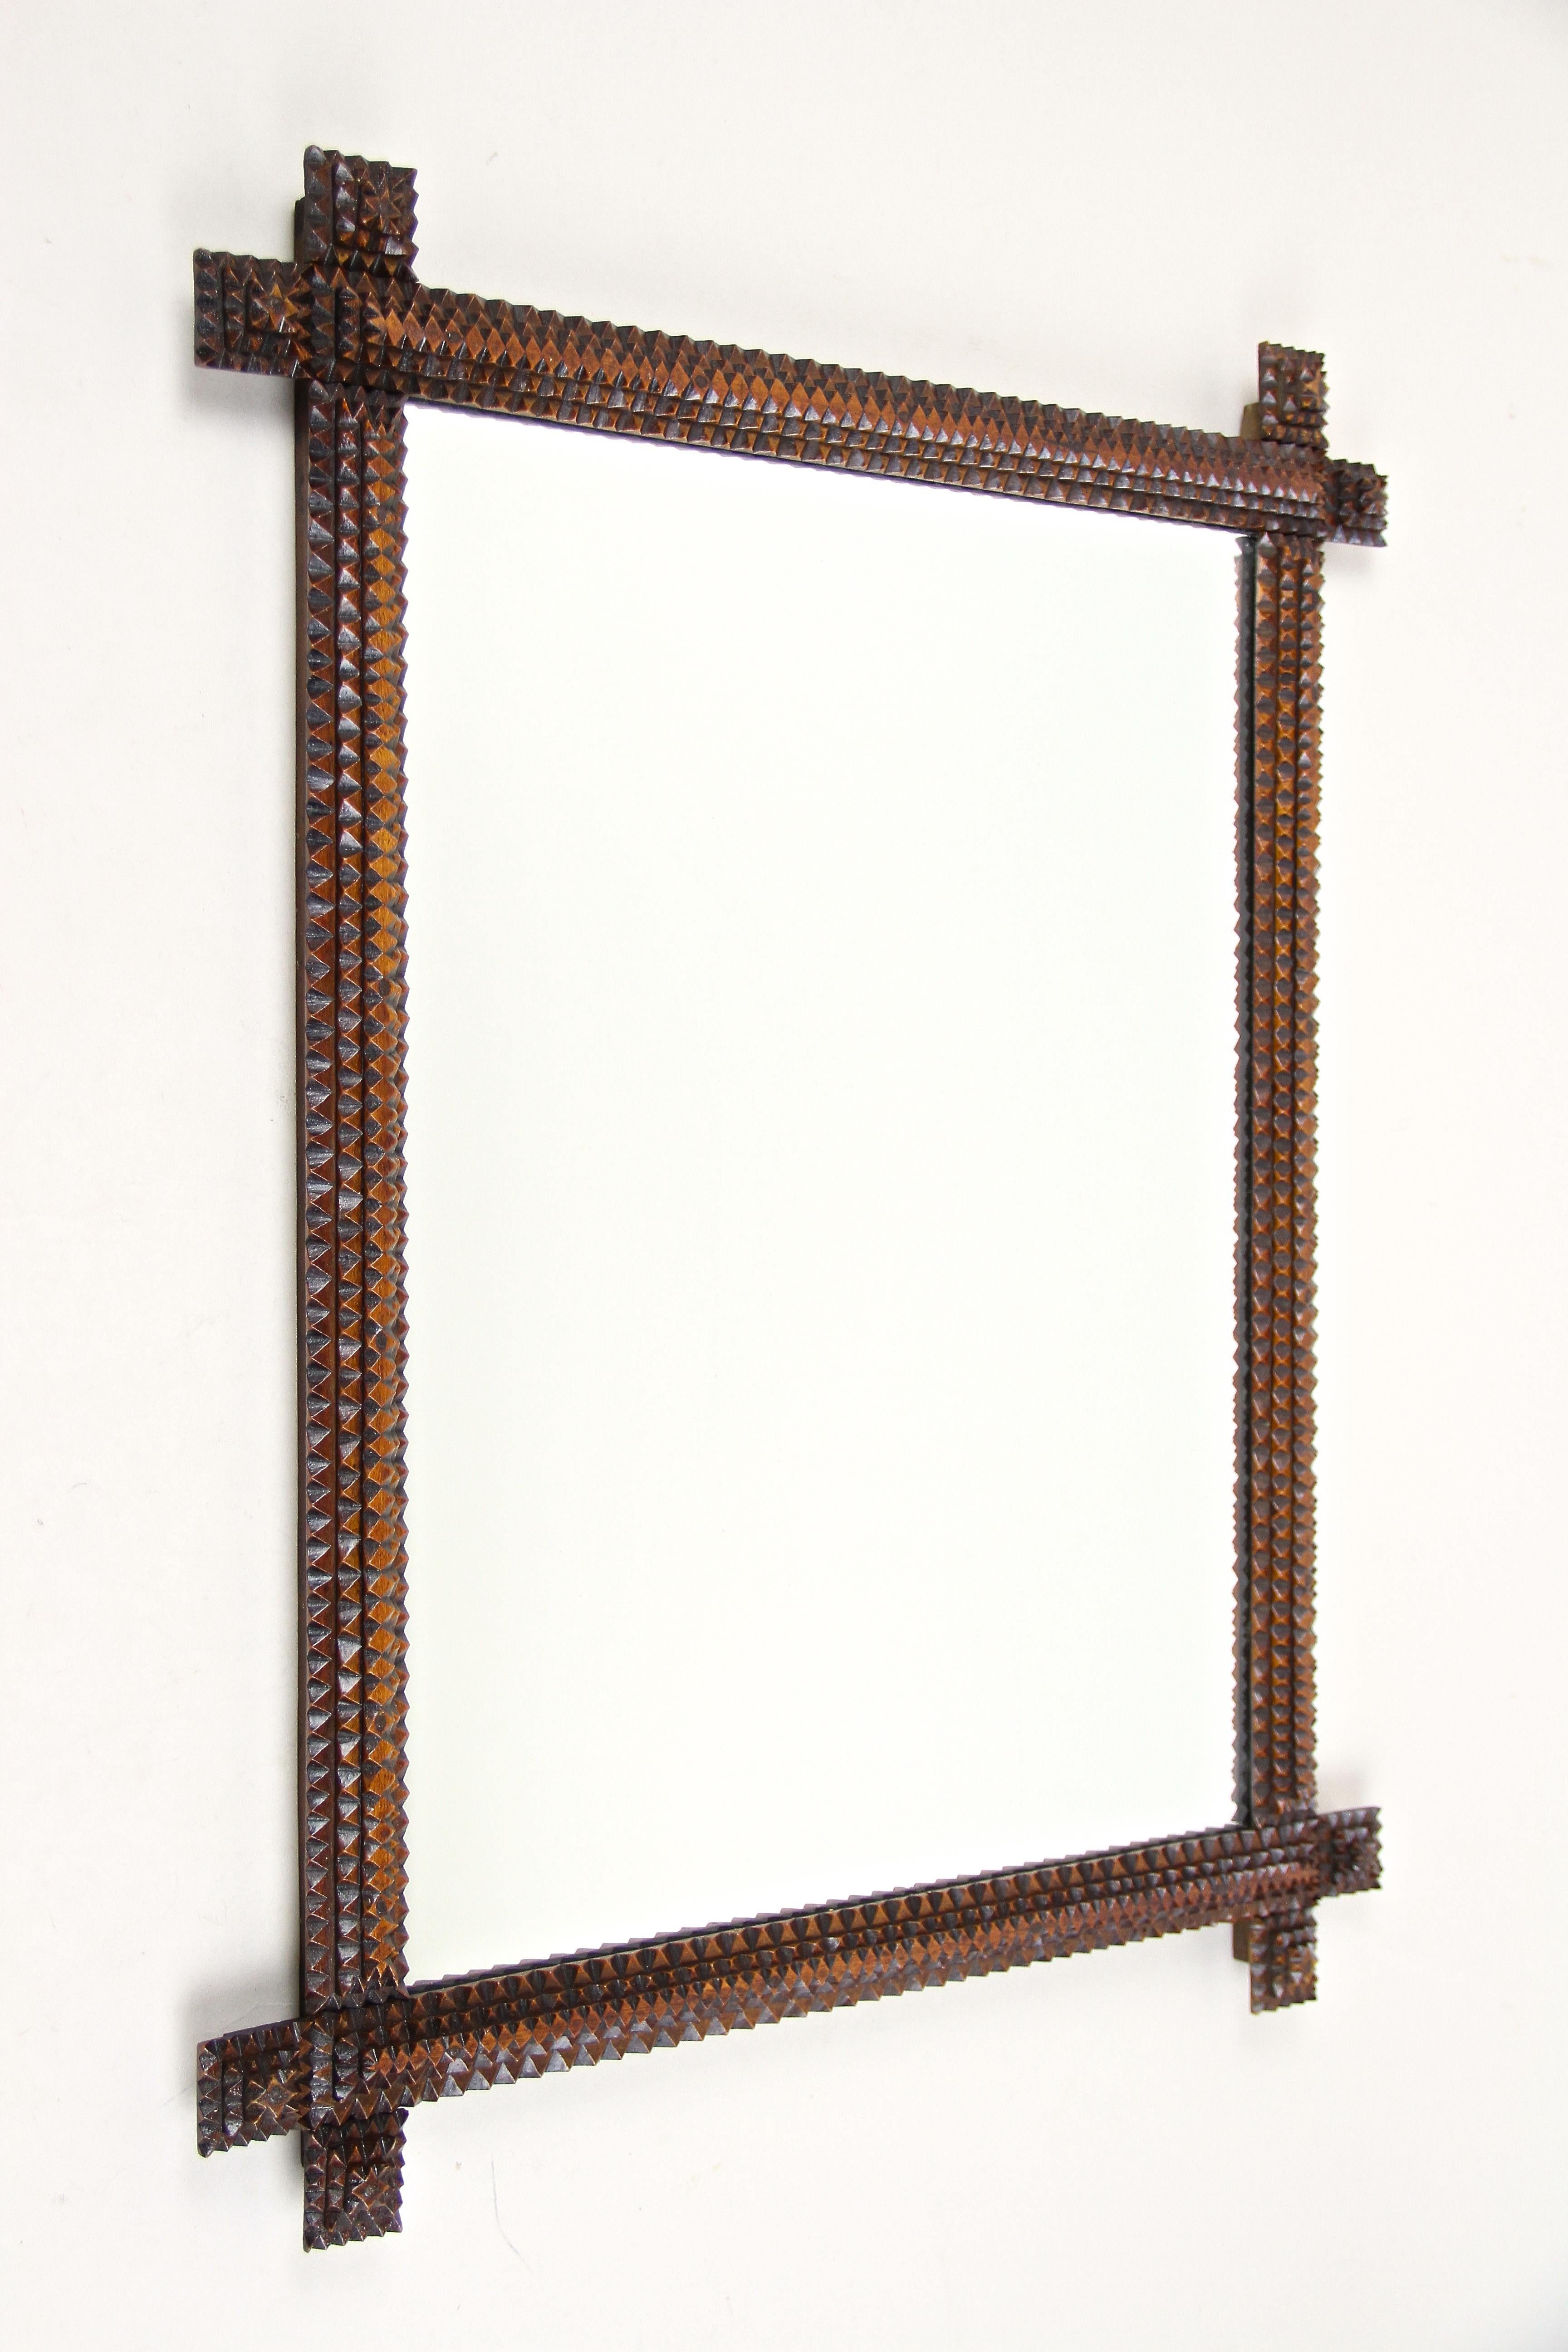 Exceptional rustic Tramp Art wall mirror from the late 19th century in Austria. This remarkable hand carved wooden mirror has been artfully handcrafted out of basswood around 1880 and comes with a delightful brown varnished surface. Beside the